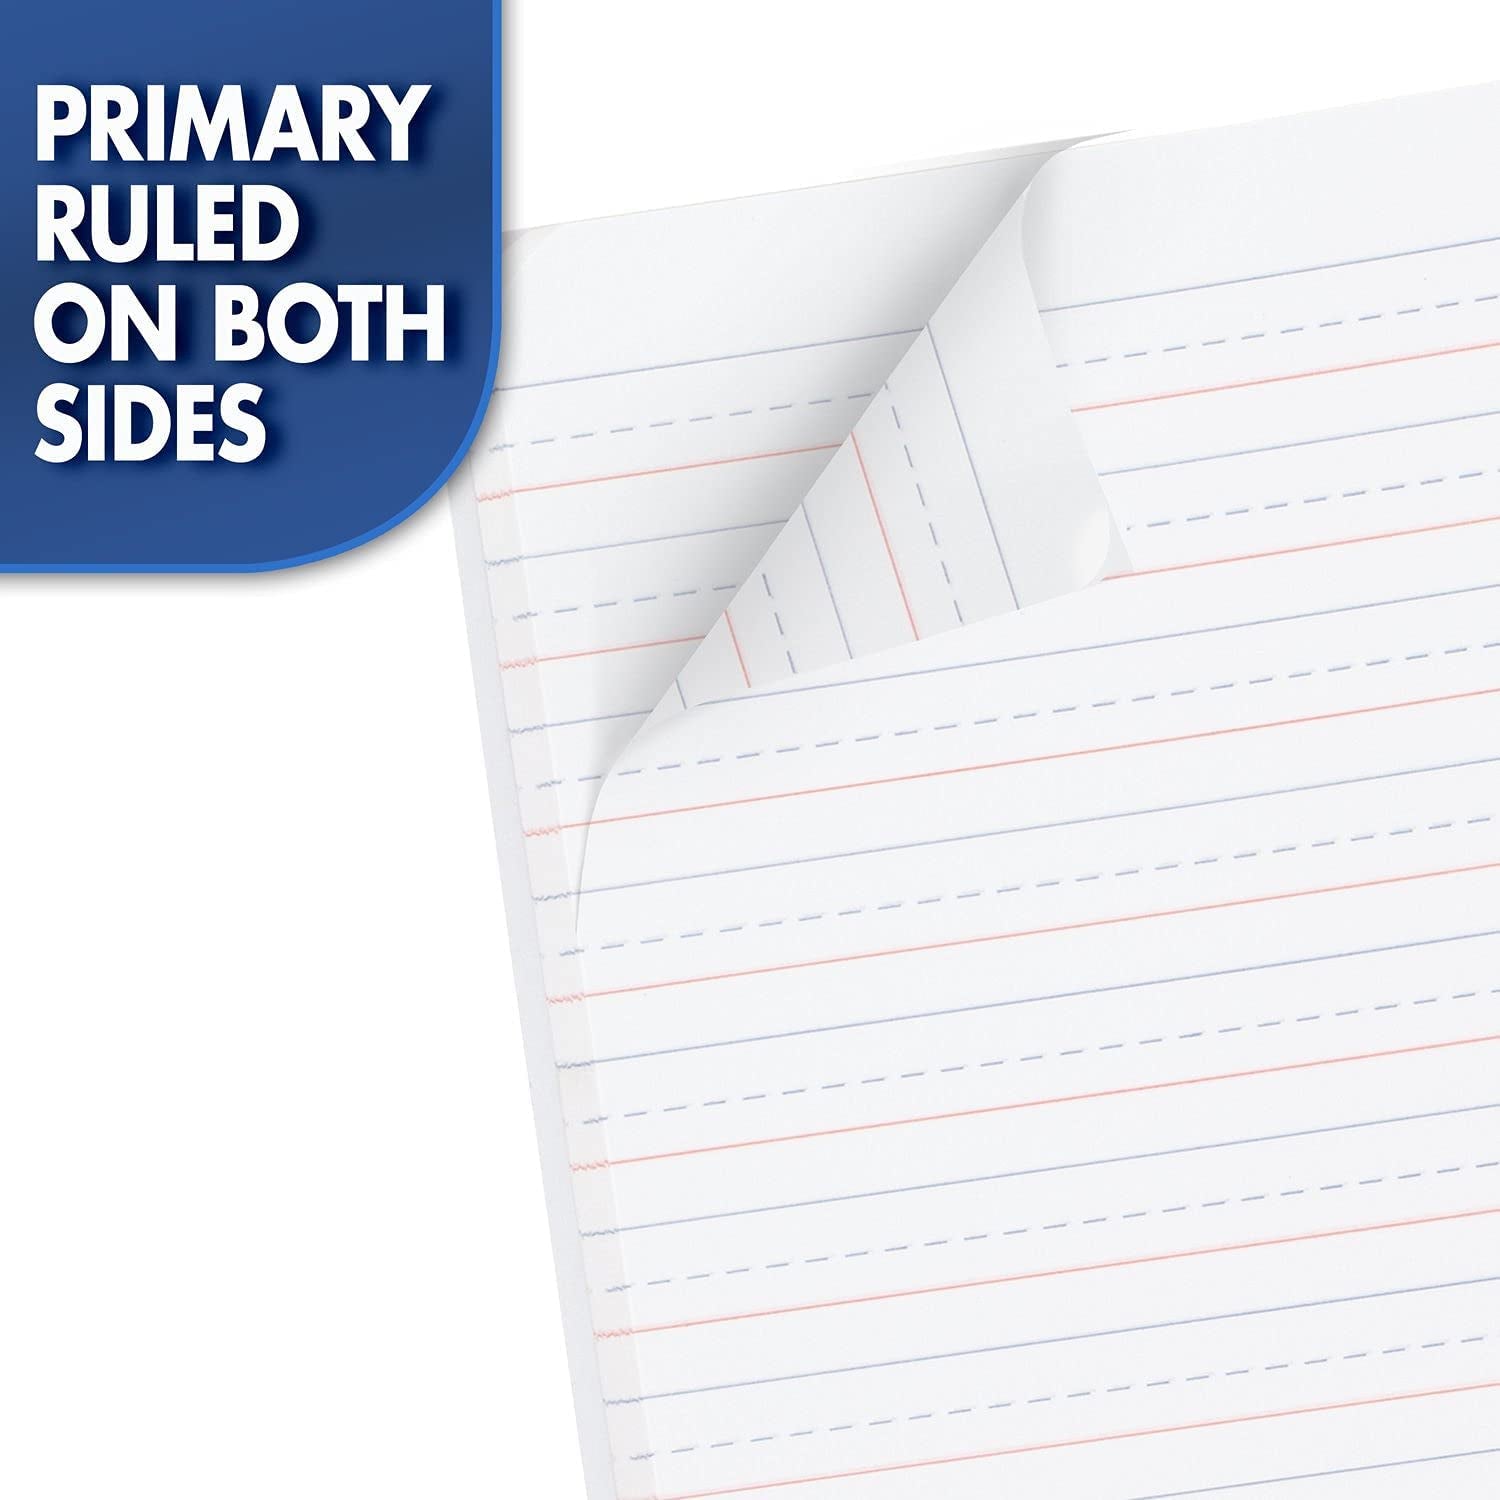 Mead Primary Composition Notebook, Wide Ruled Paper, Grades K-2 Writing Workbook, 9-3/4